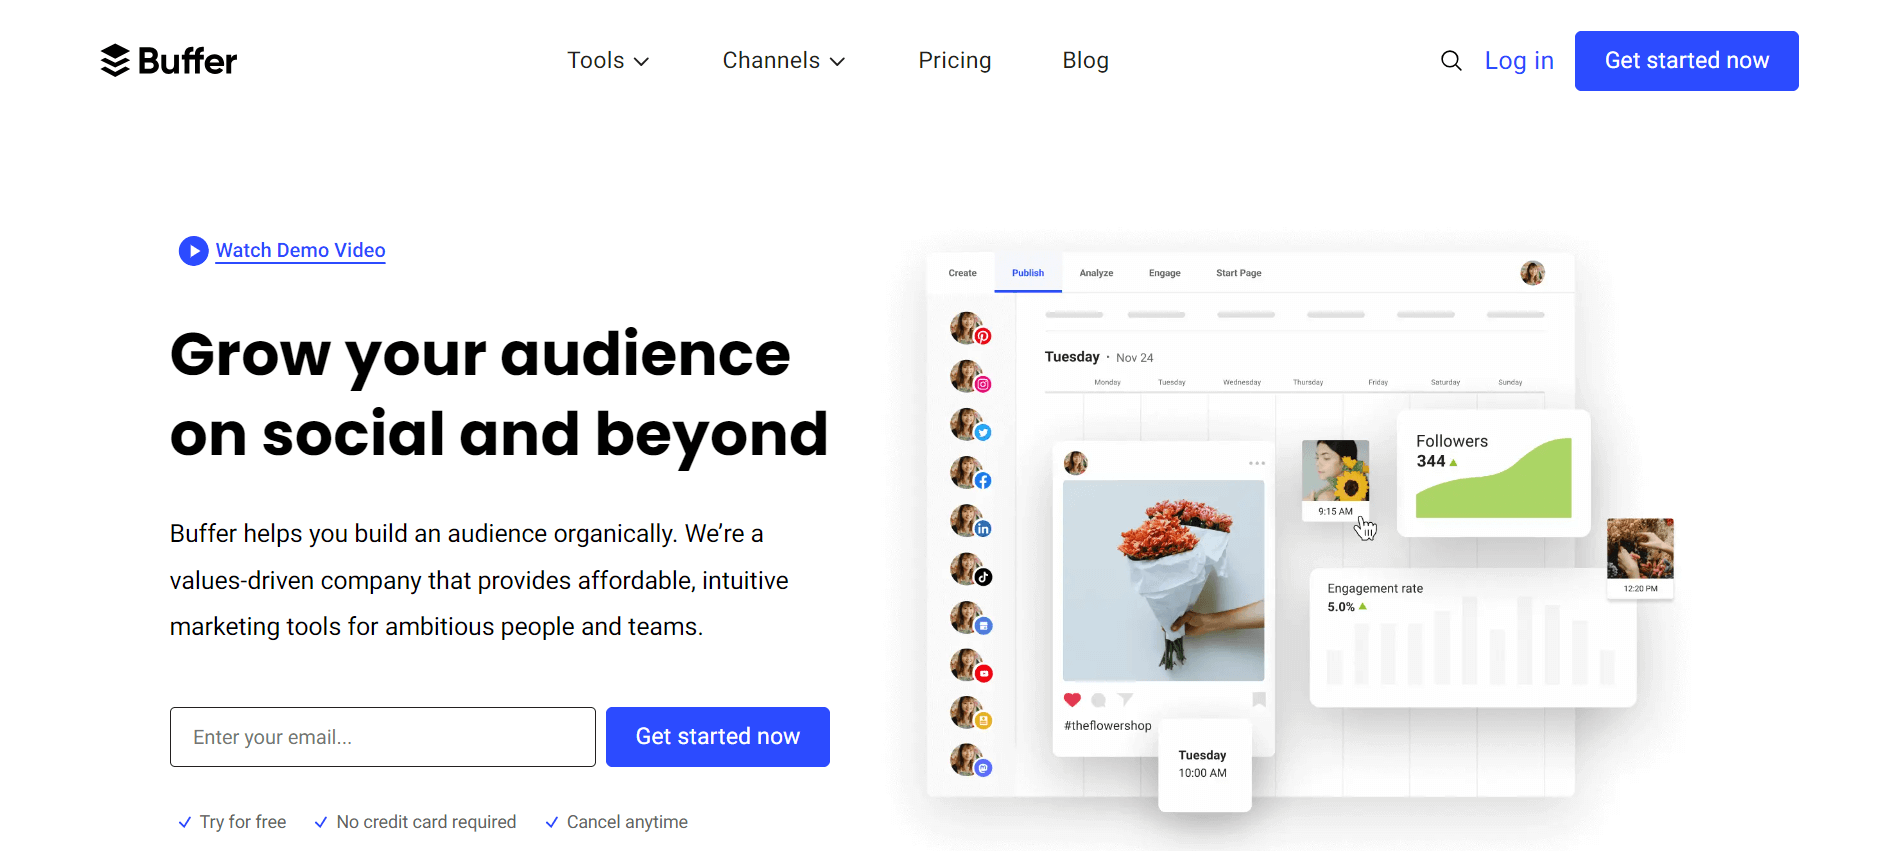 Homepage of Buffer highlighting their social media tools aimed at growing audiences organically. Features include a display of their scheduling interface and engagement analytics.